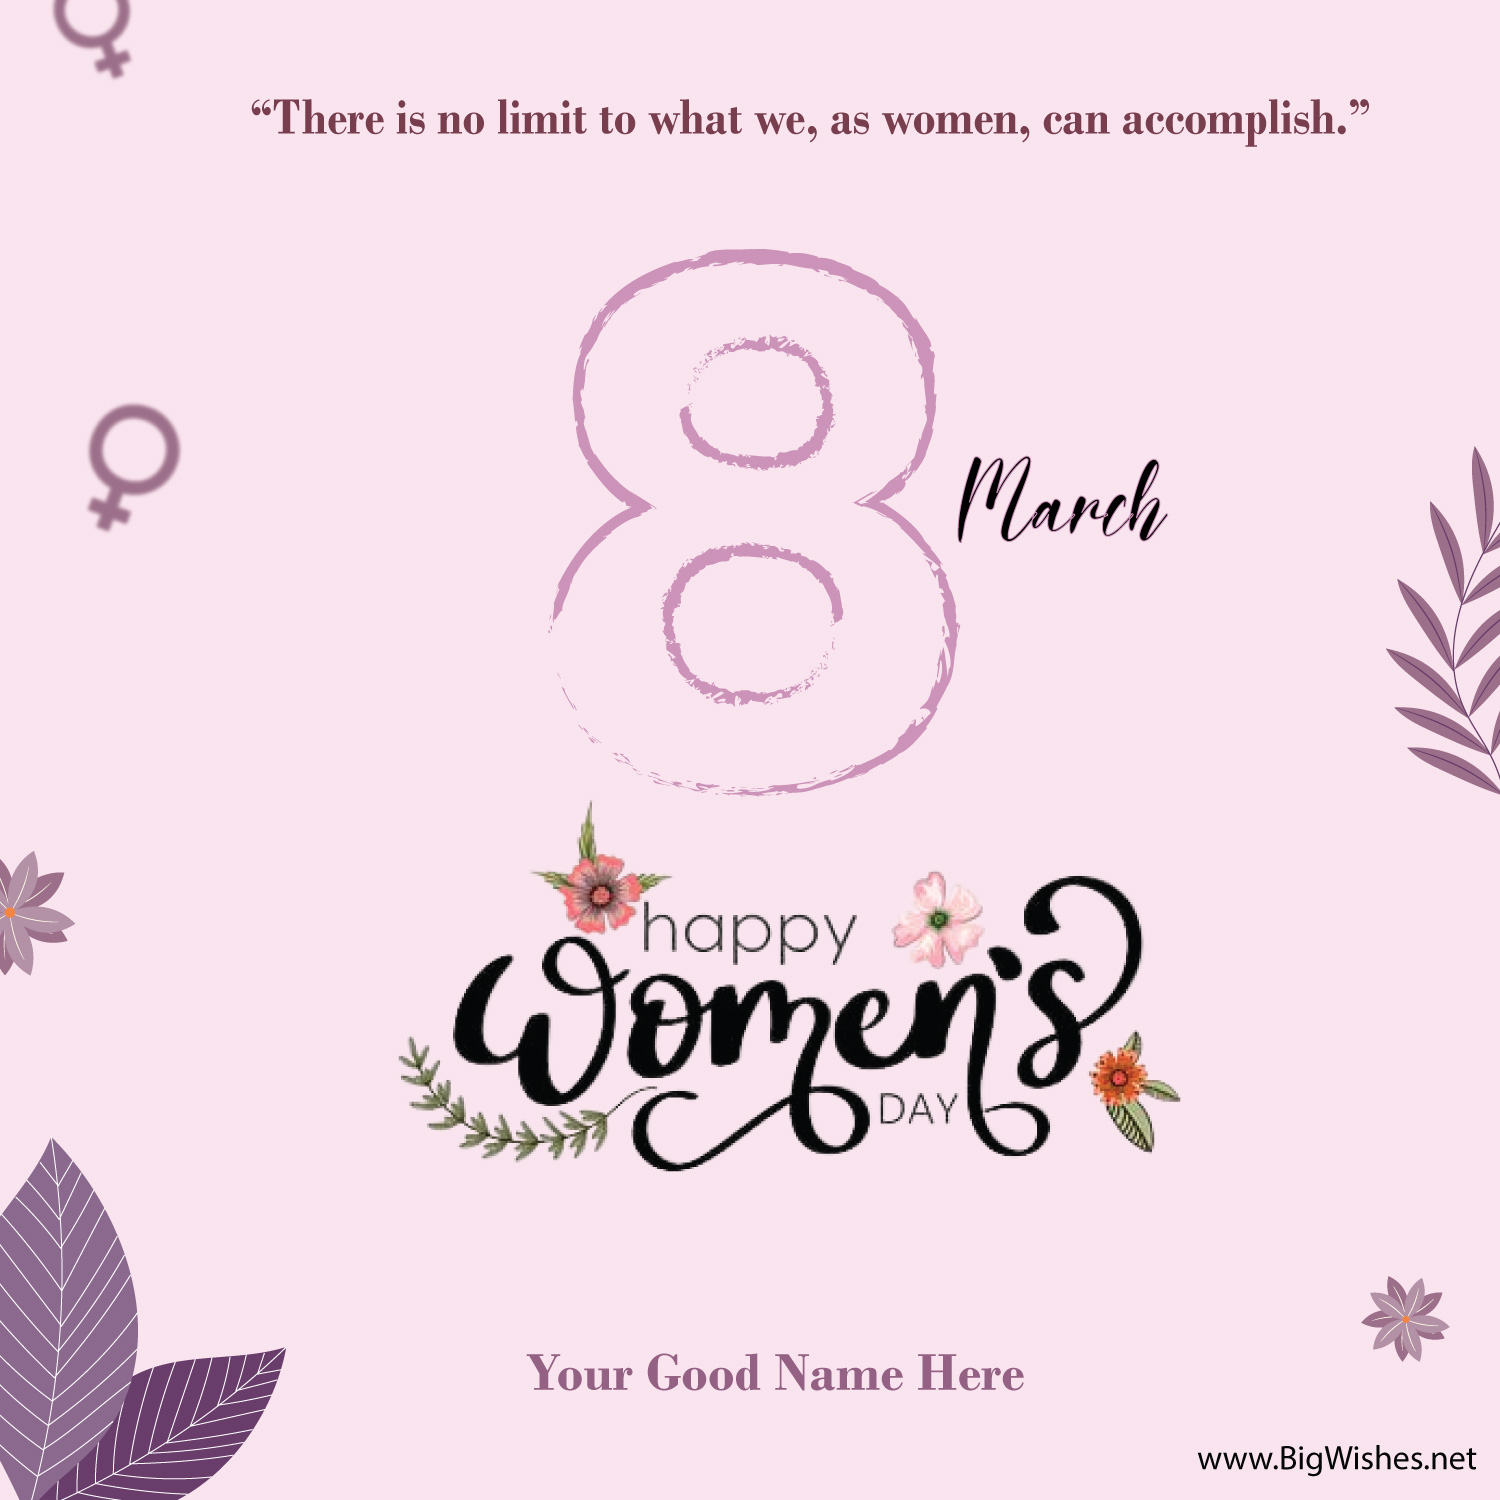 International Women's Day Wishes Image & Cardsth March 2023